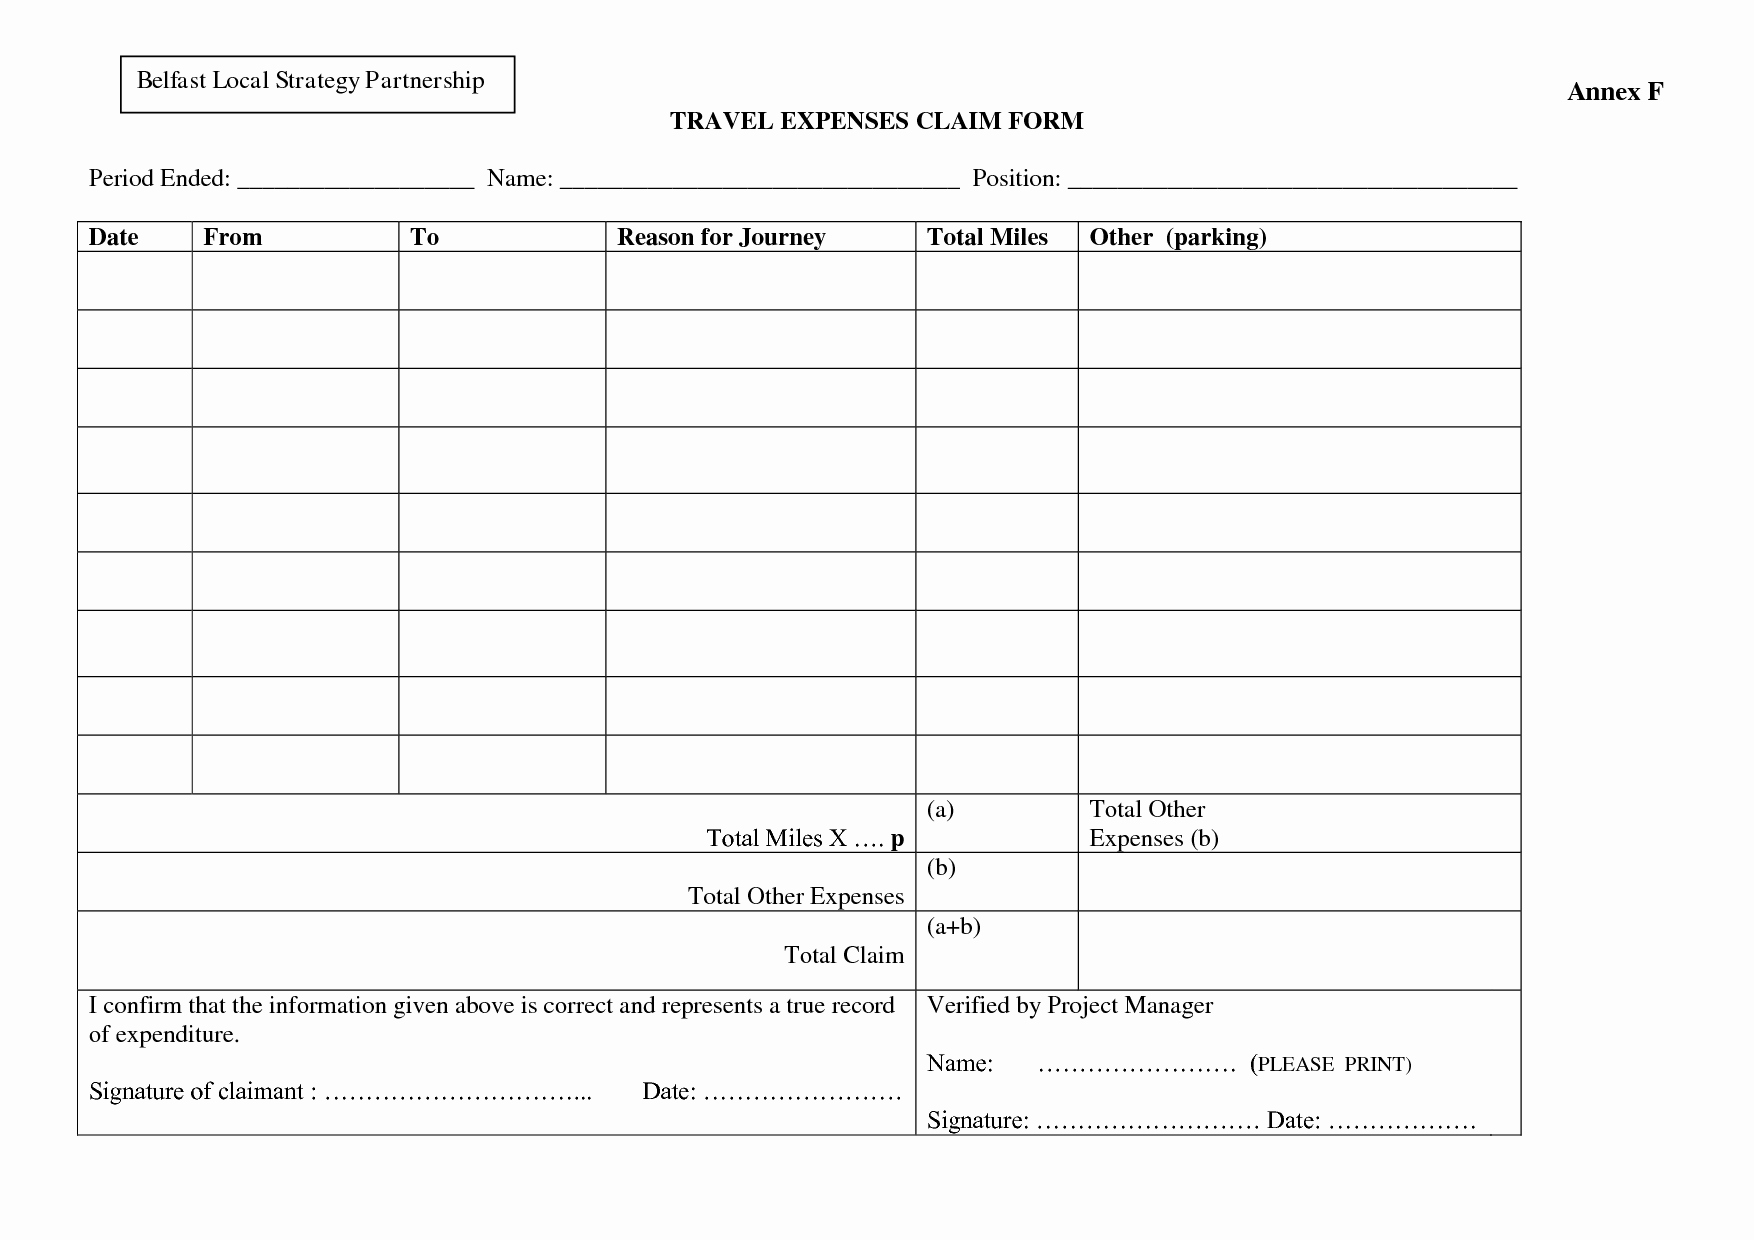 Expense Report form Template Luxury Expenses form Template Portablegasgrillweber